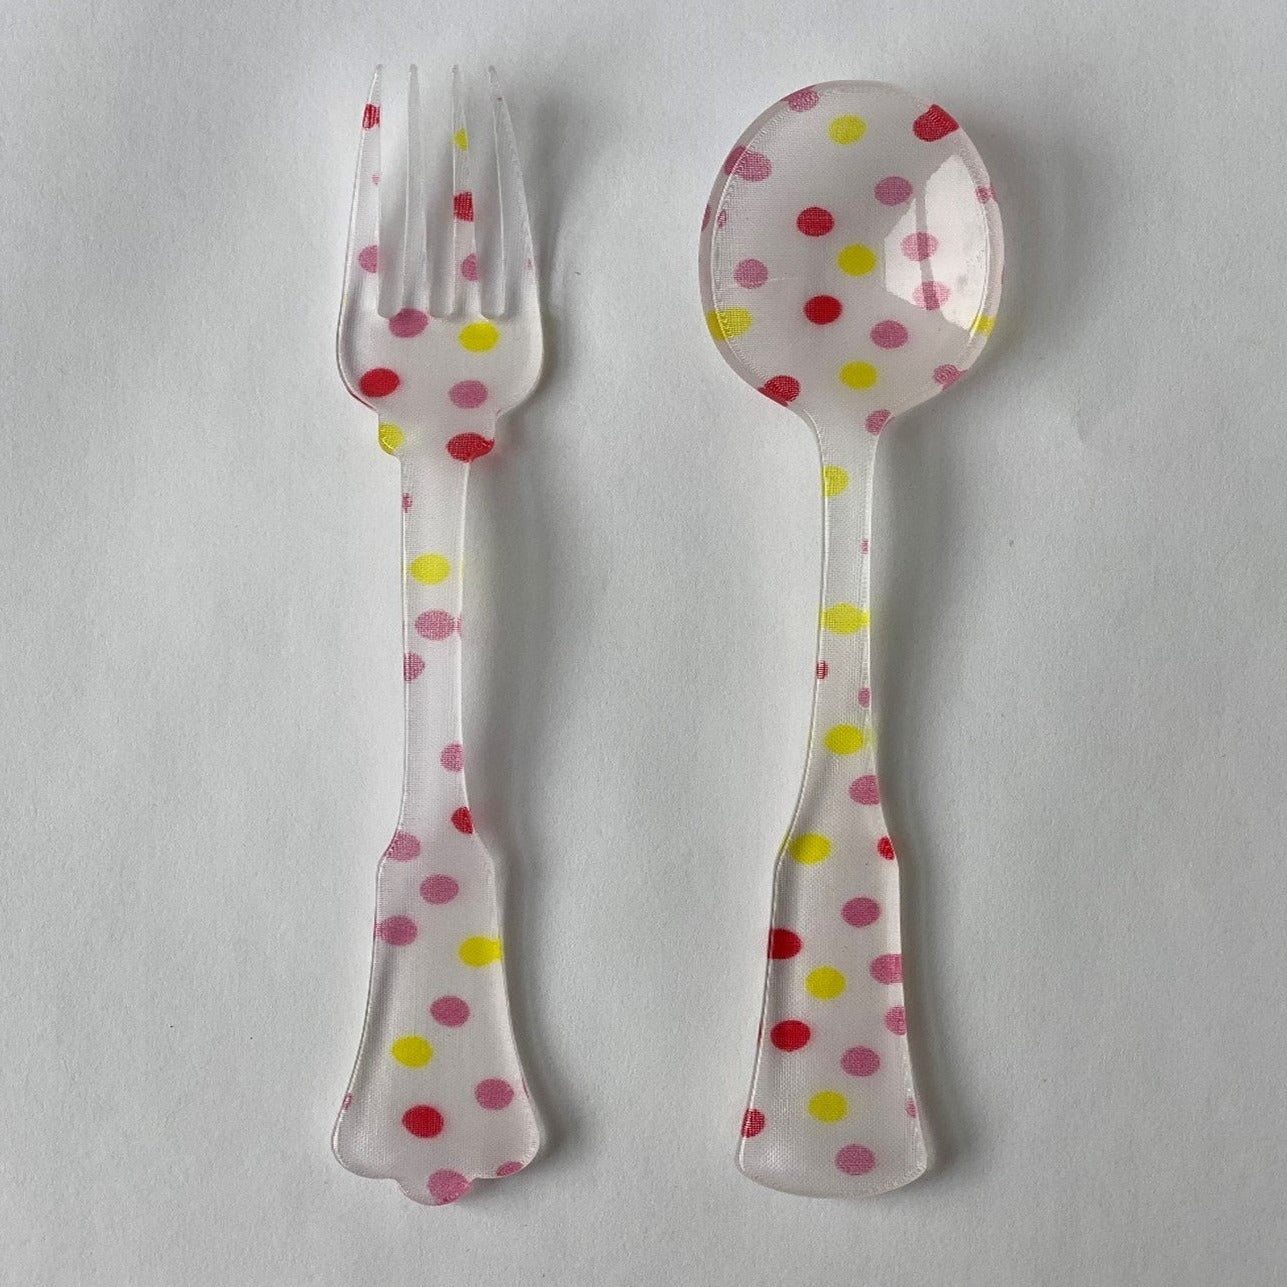 Tea Spoon - Old Fashioned, Pink and Yellow Polka Dots